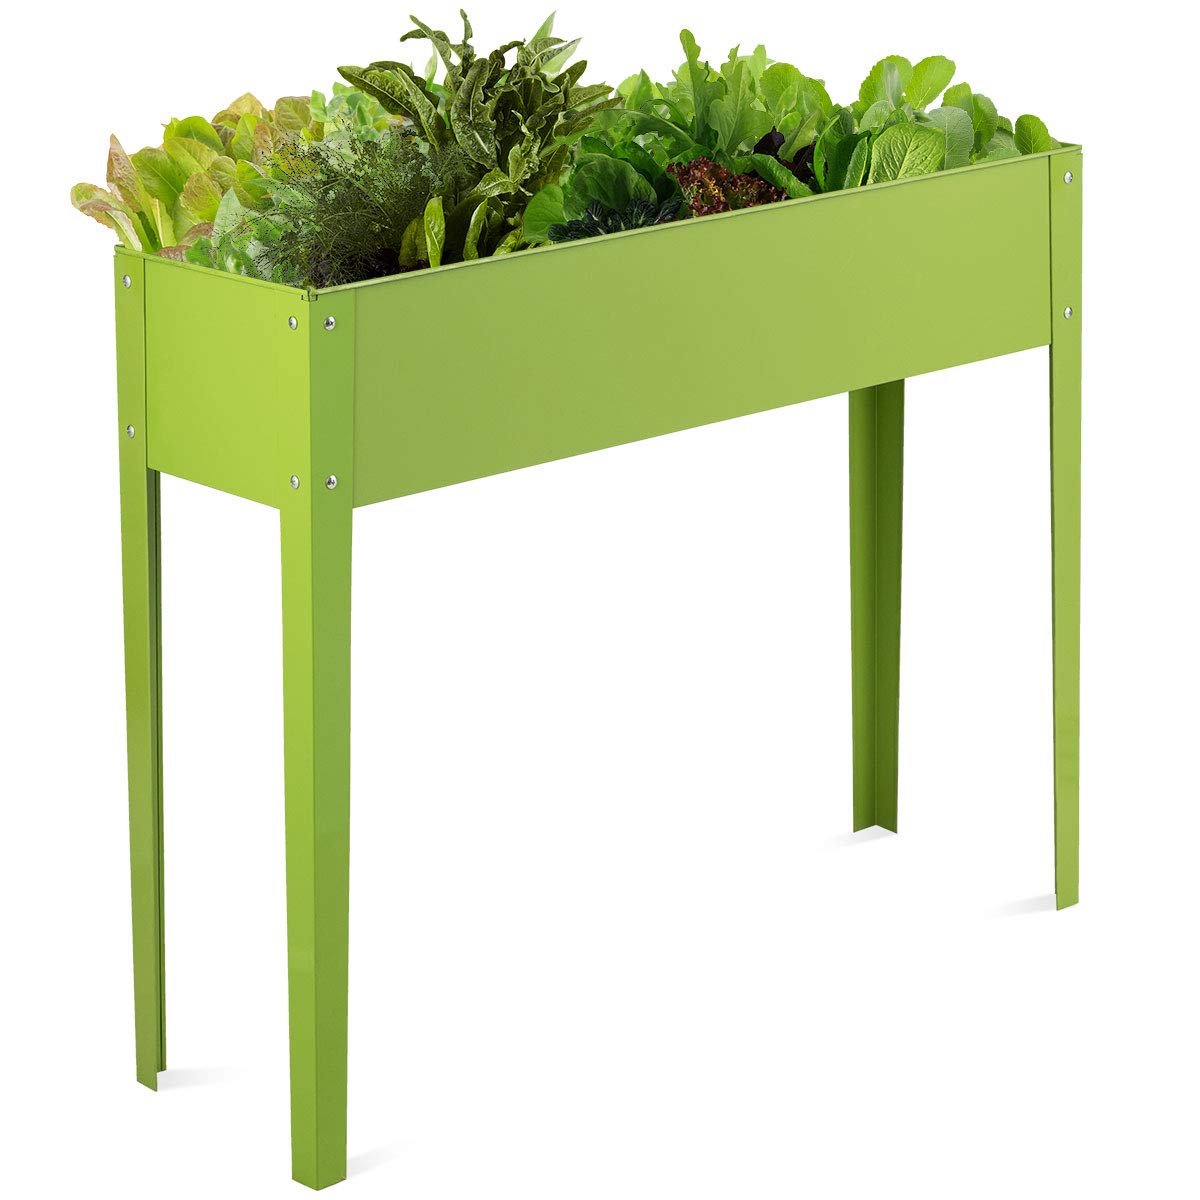 Vegetables and Flowers Growing Container for Indoor and Outdoor Use (40" x 13" x31.5")